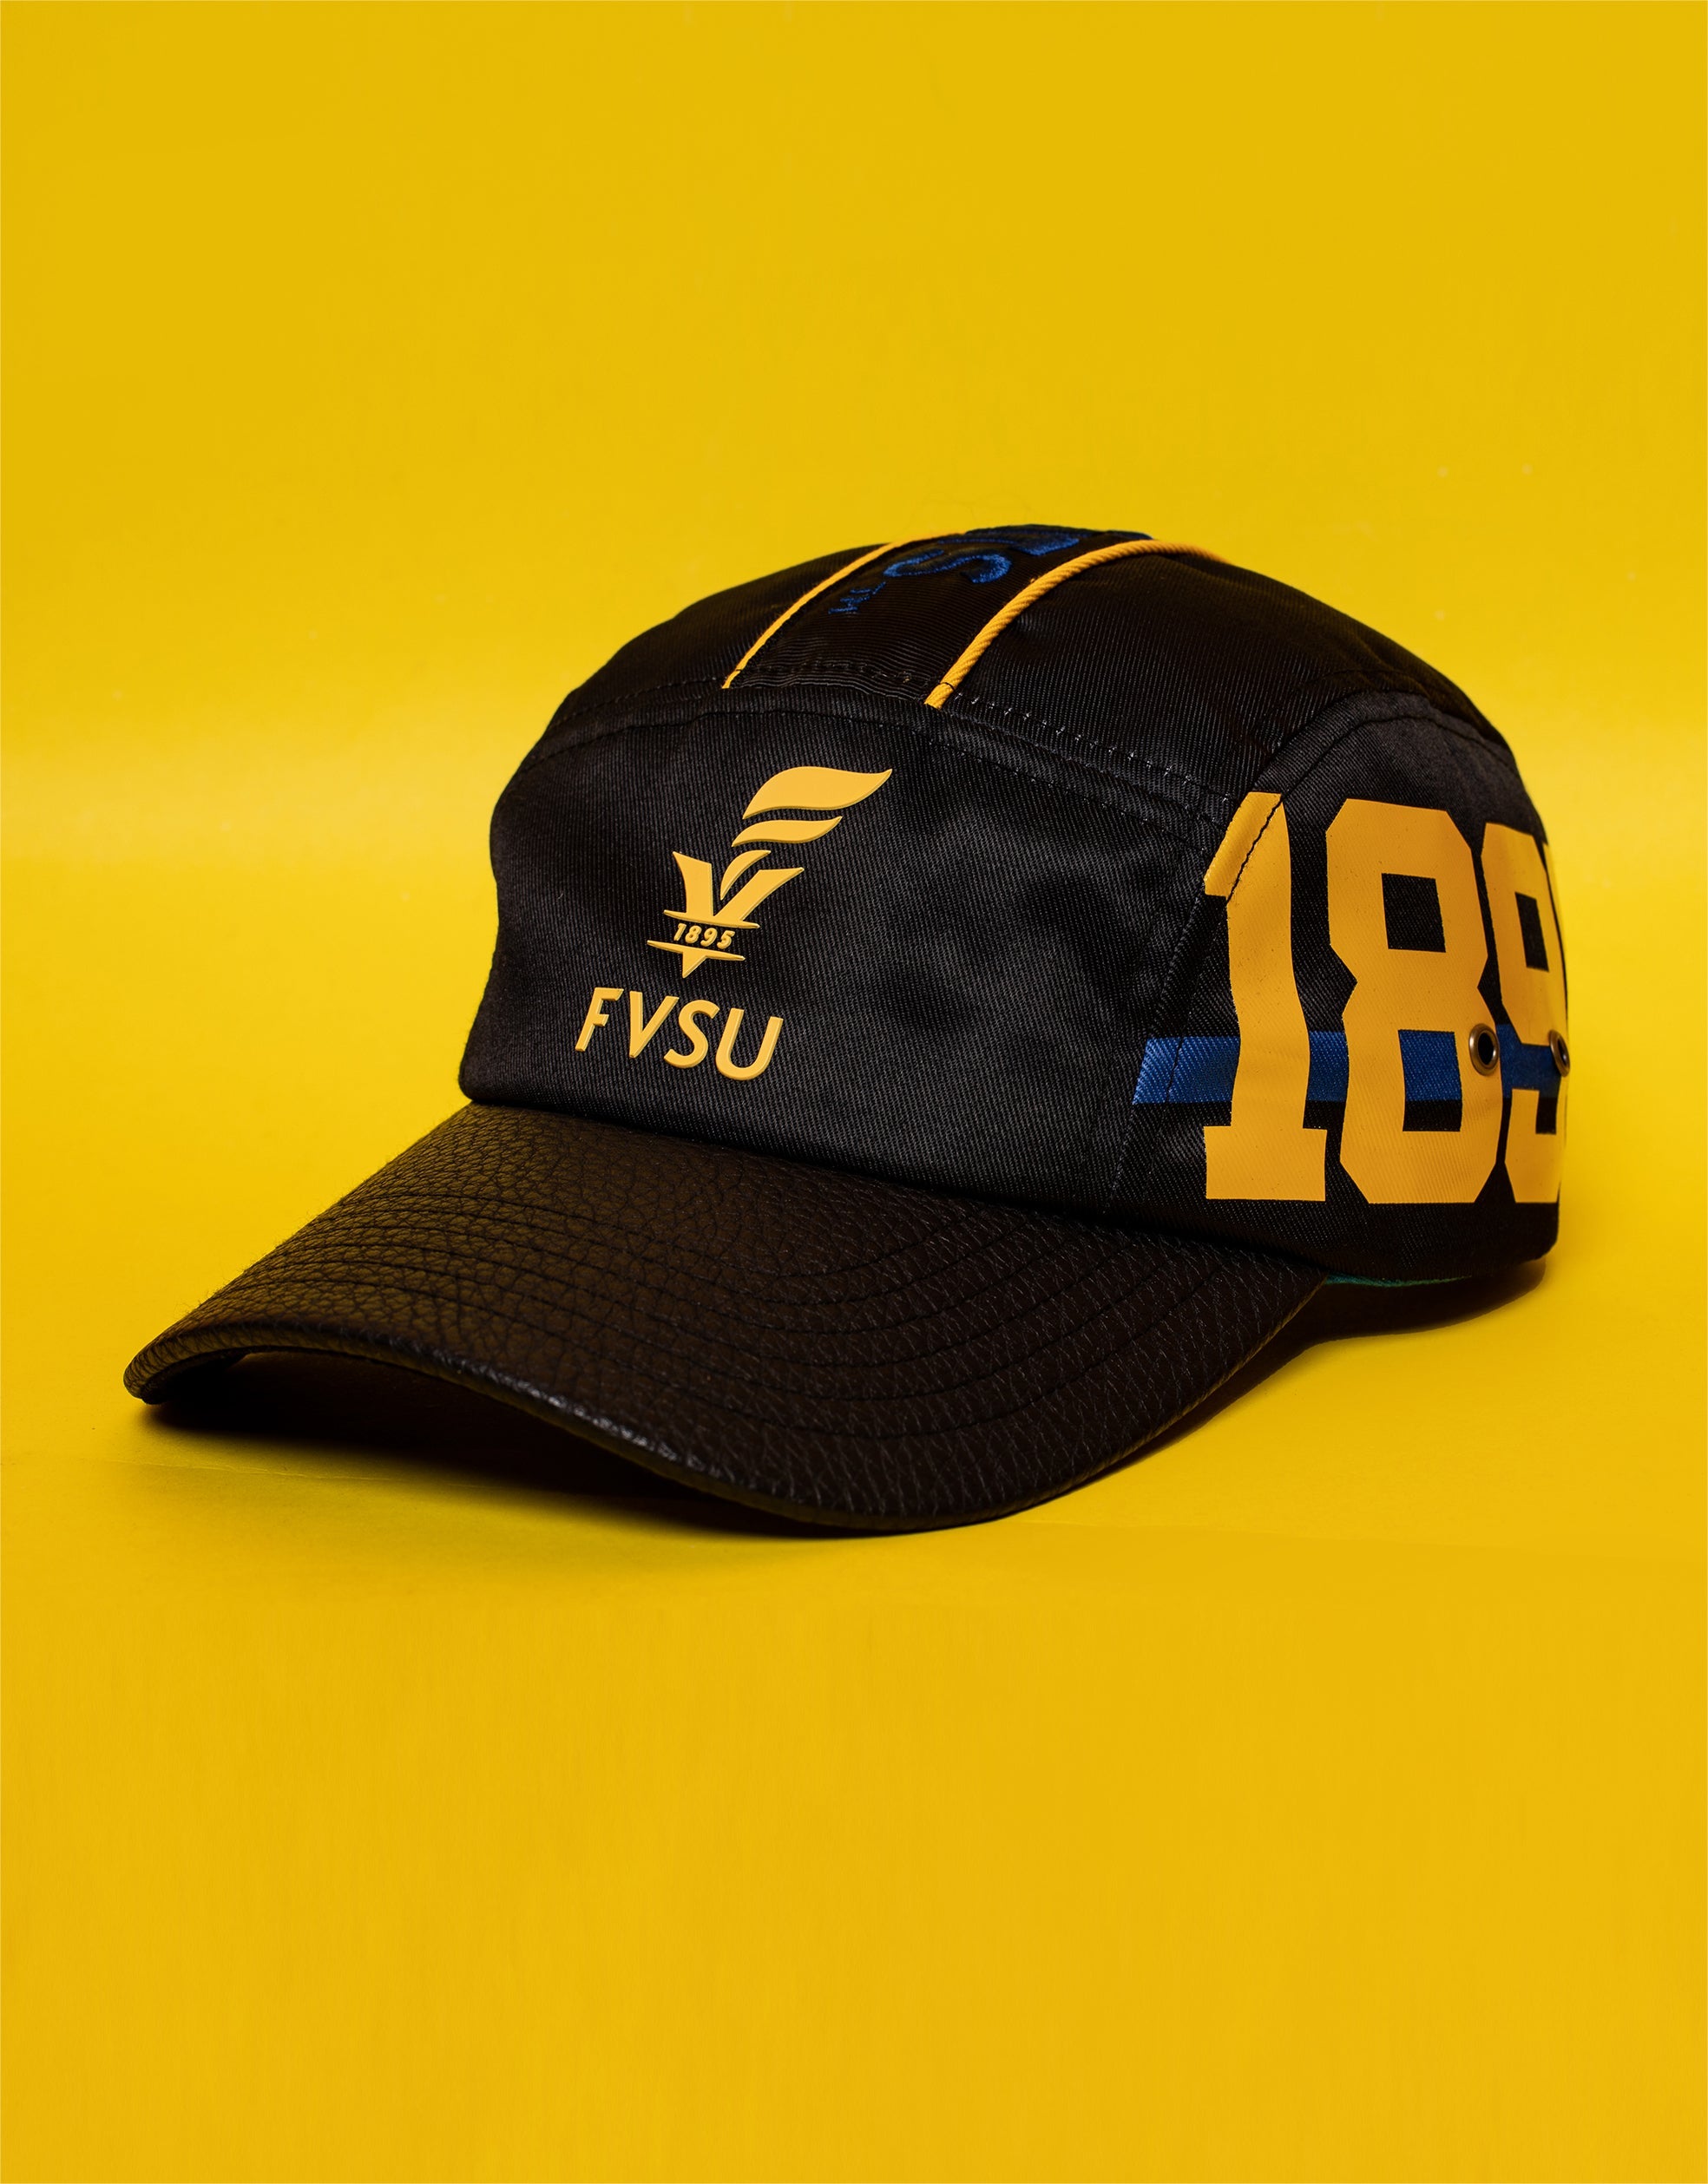 TheYard - BLACKOUT - Fort Valley State University - HBCU Hat